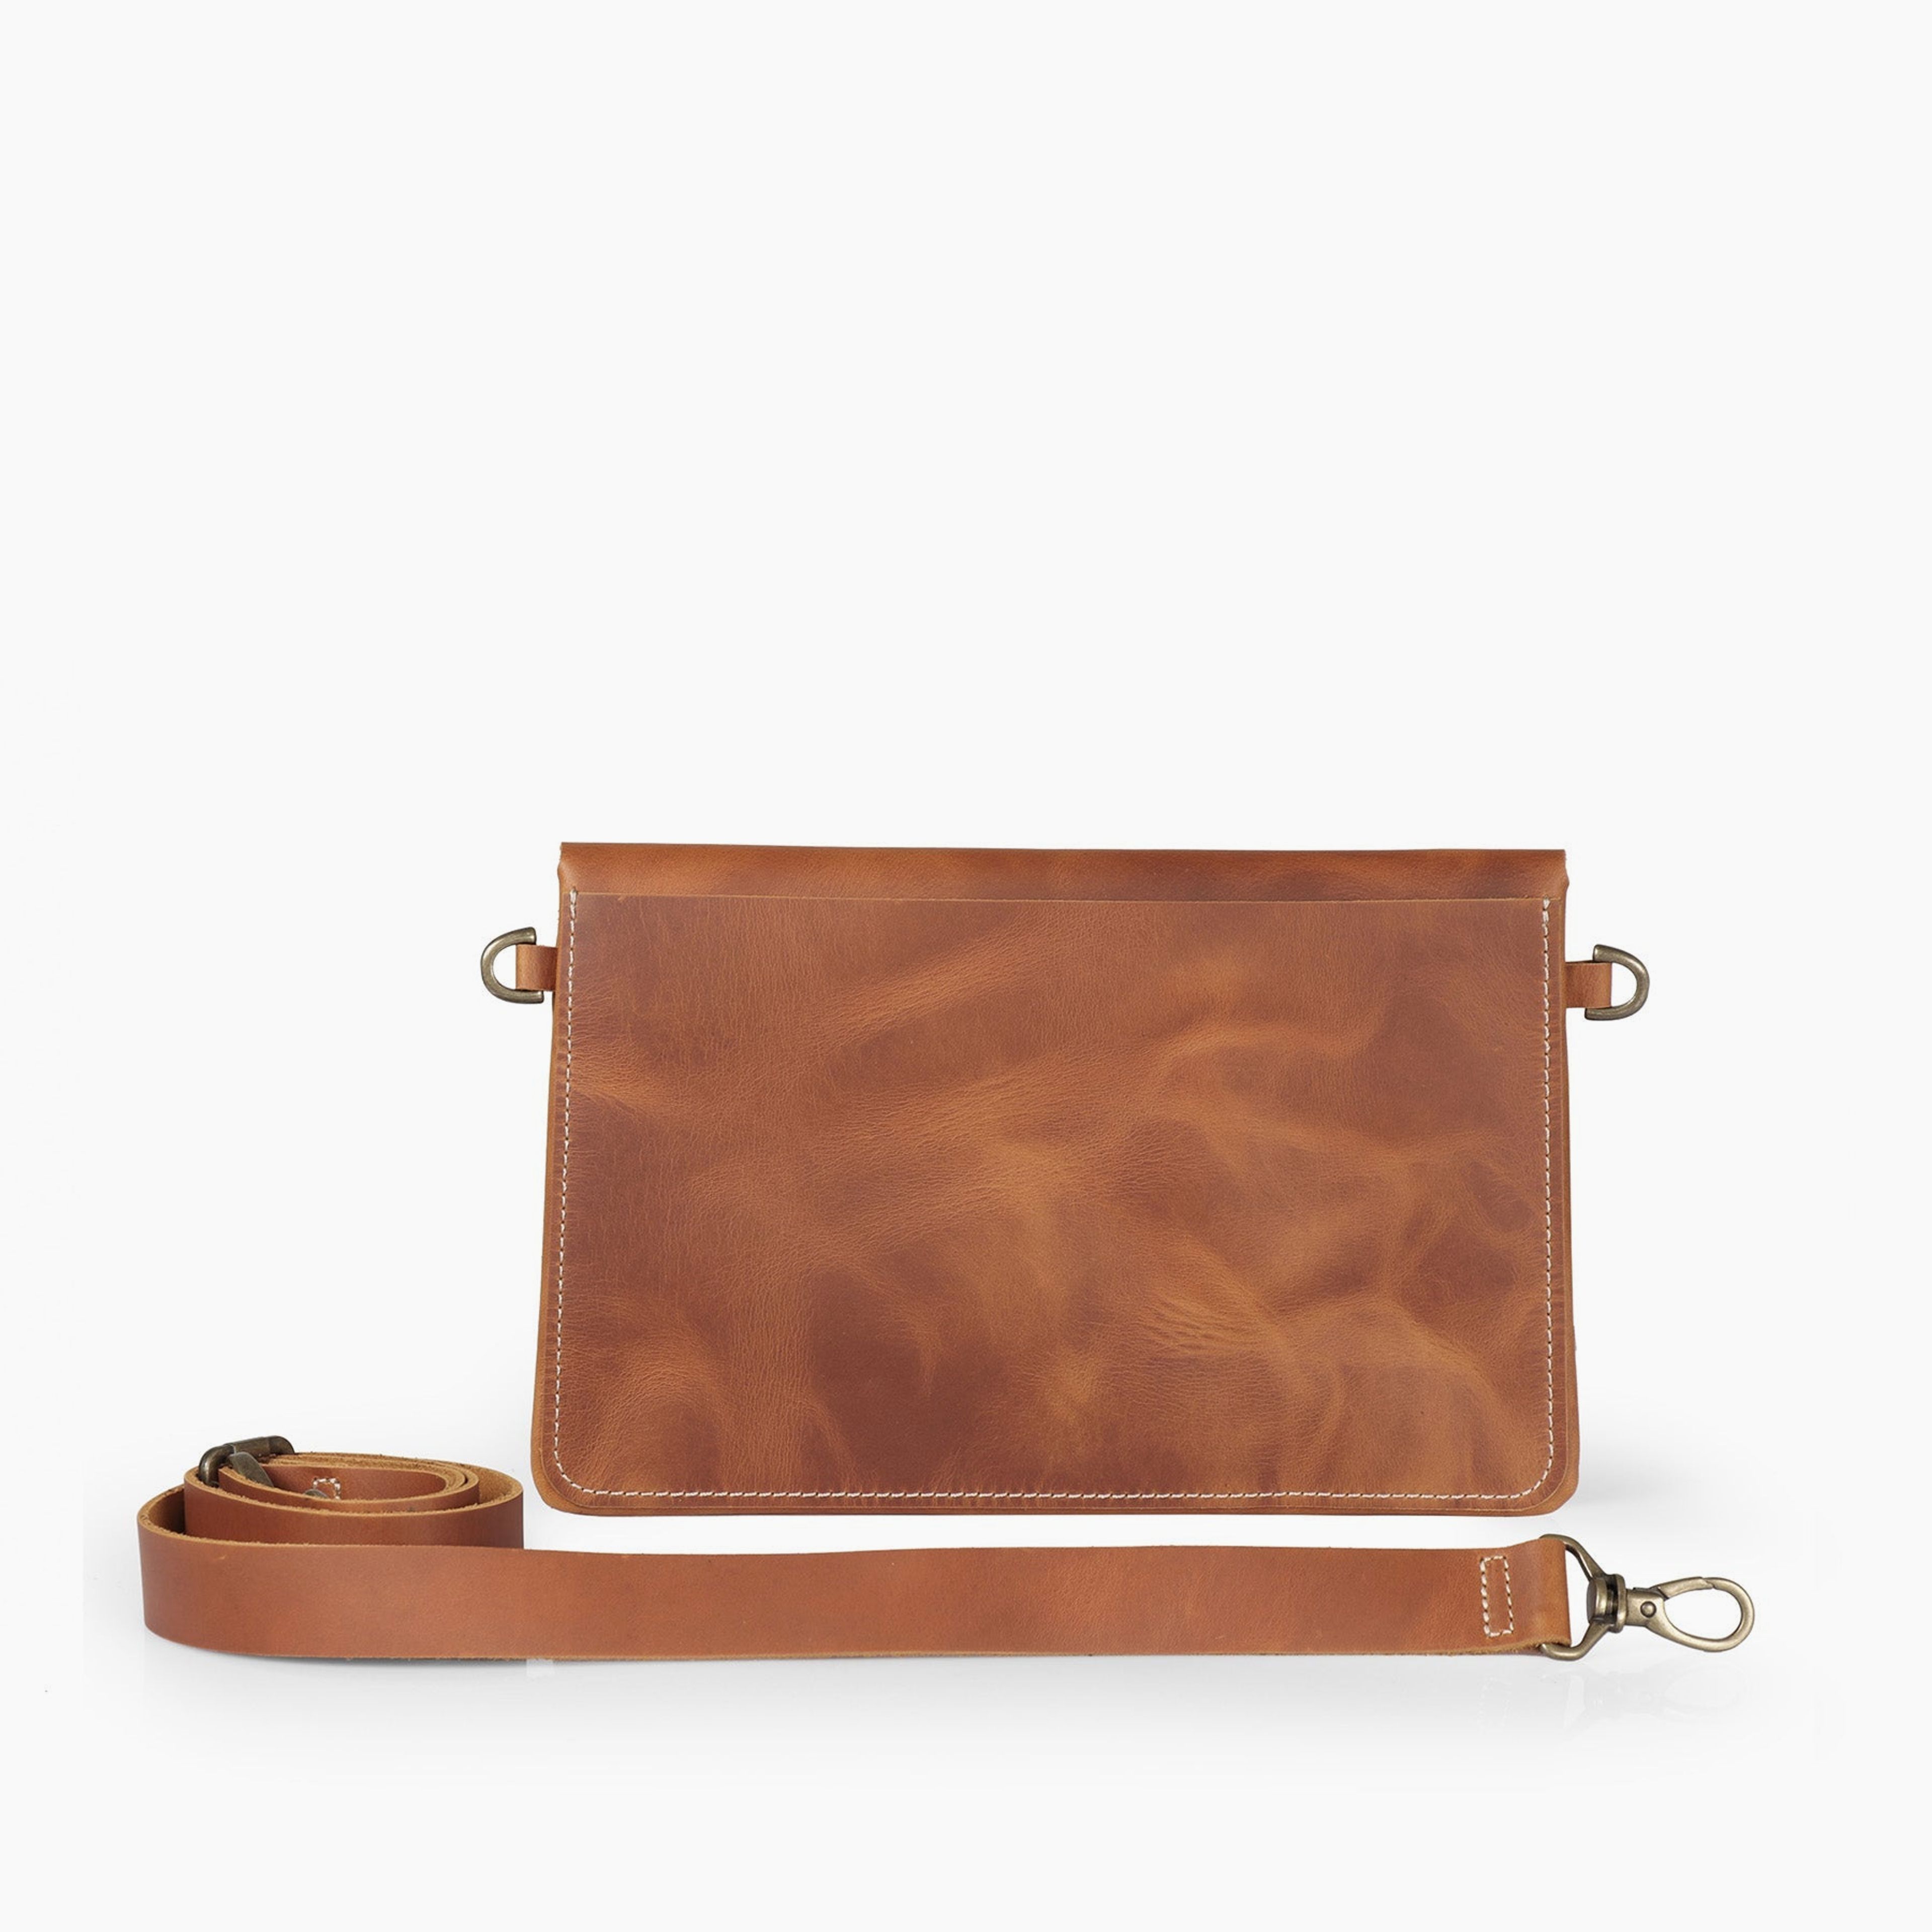 Almost Perfect | Teslin Leather Convertible Purse - Large